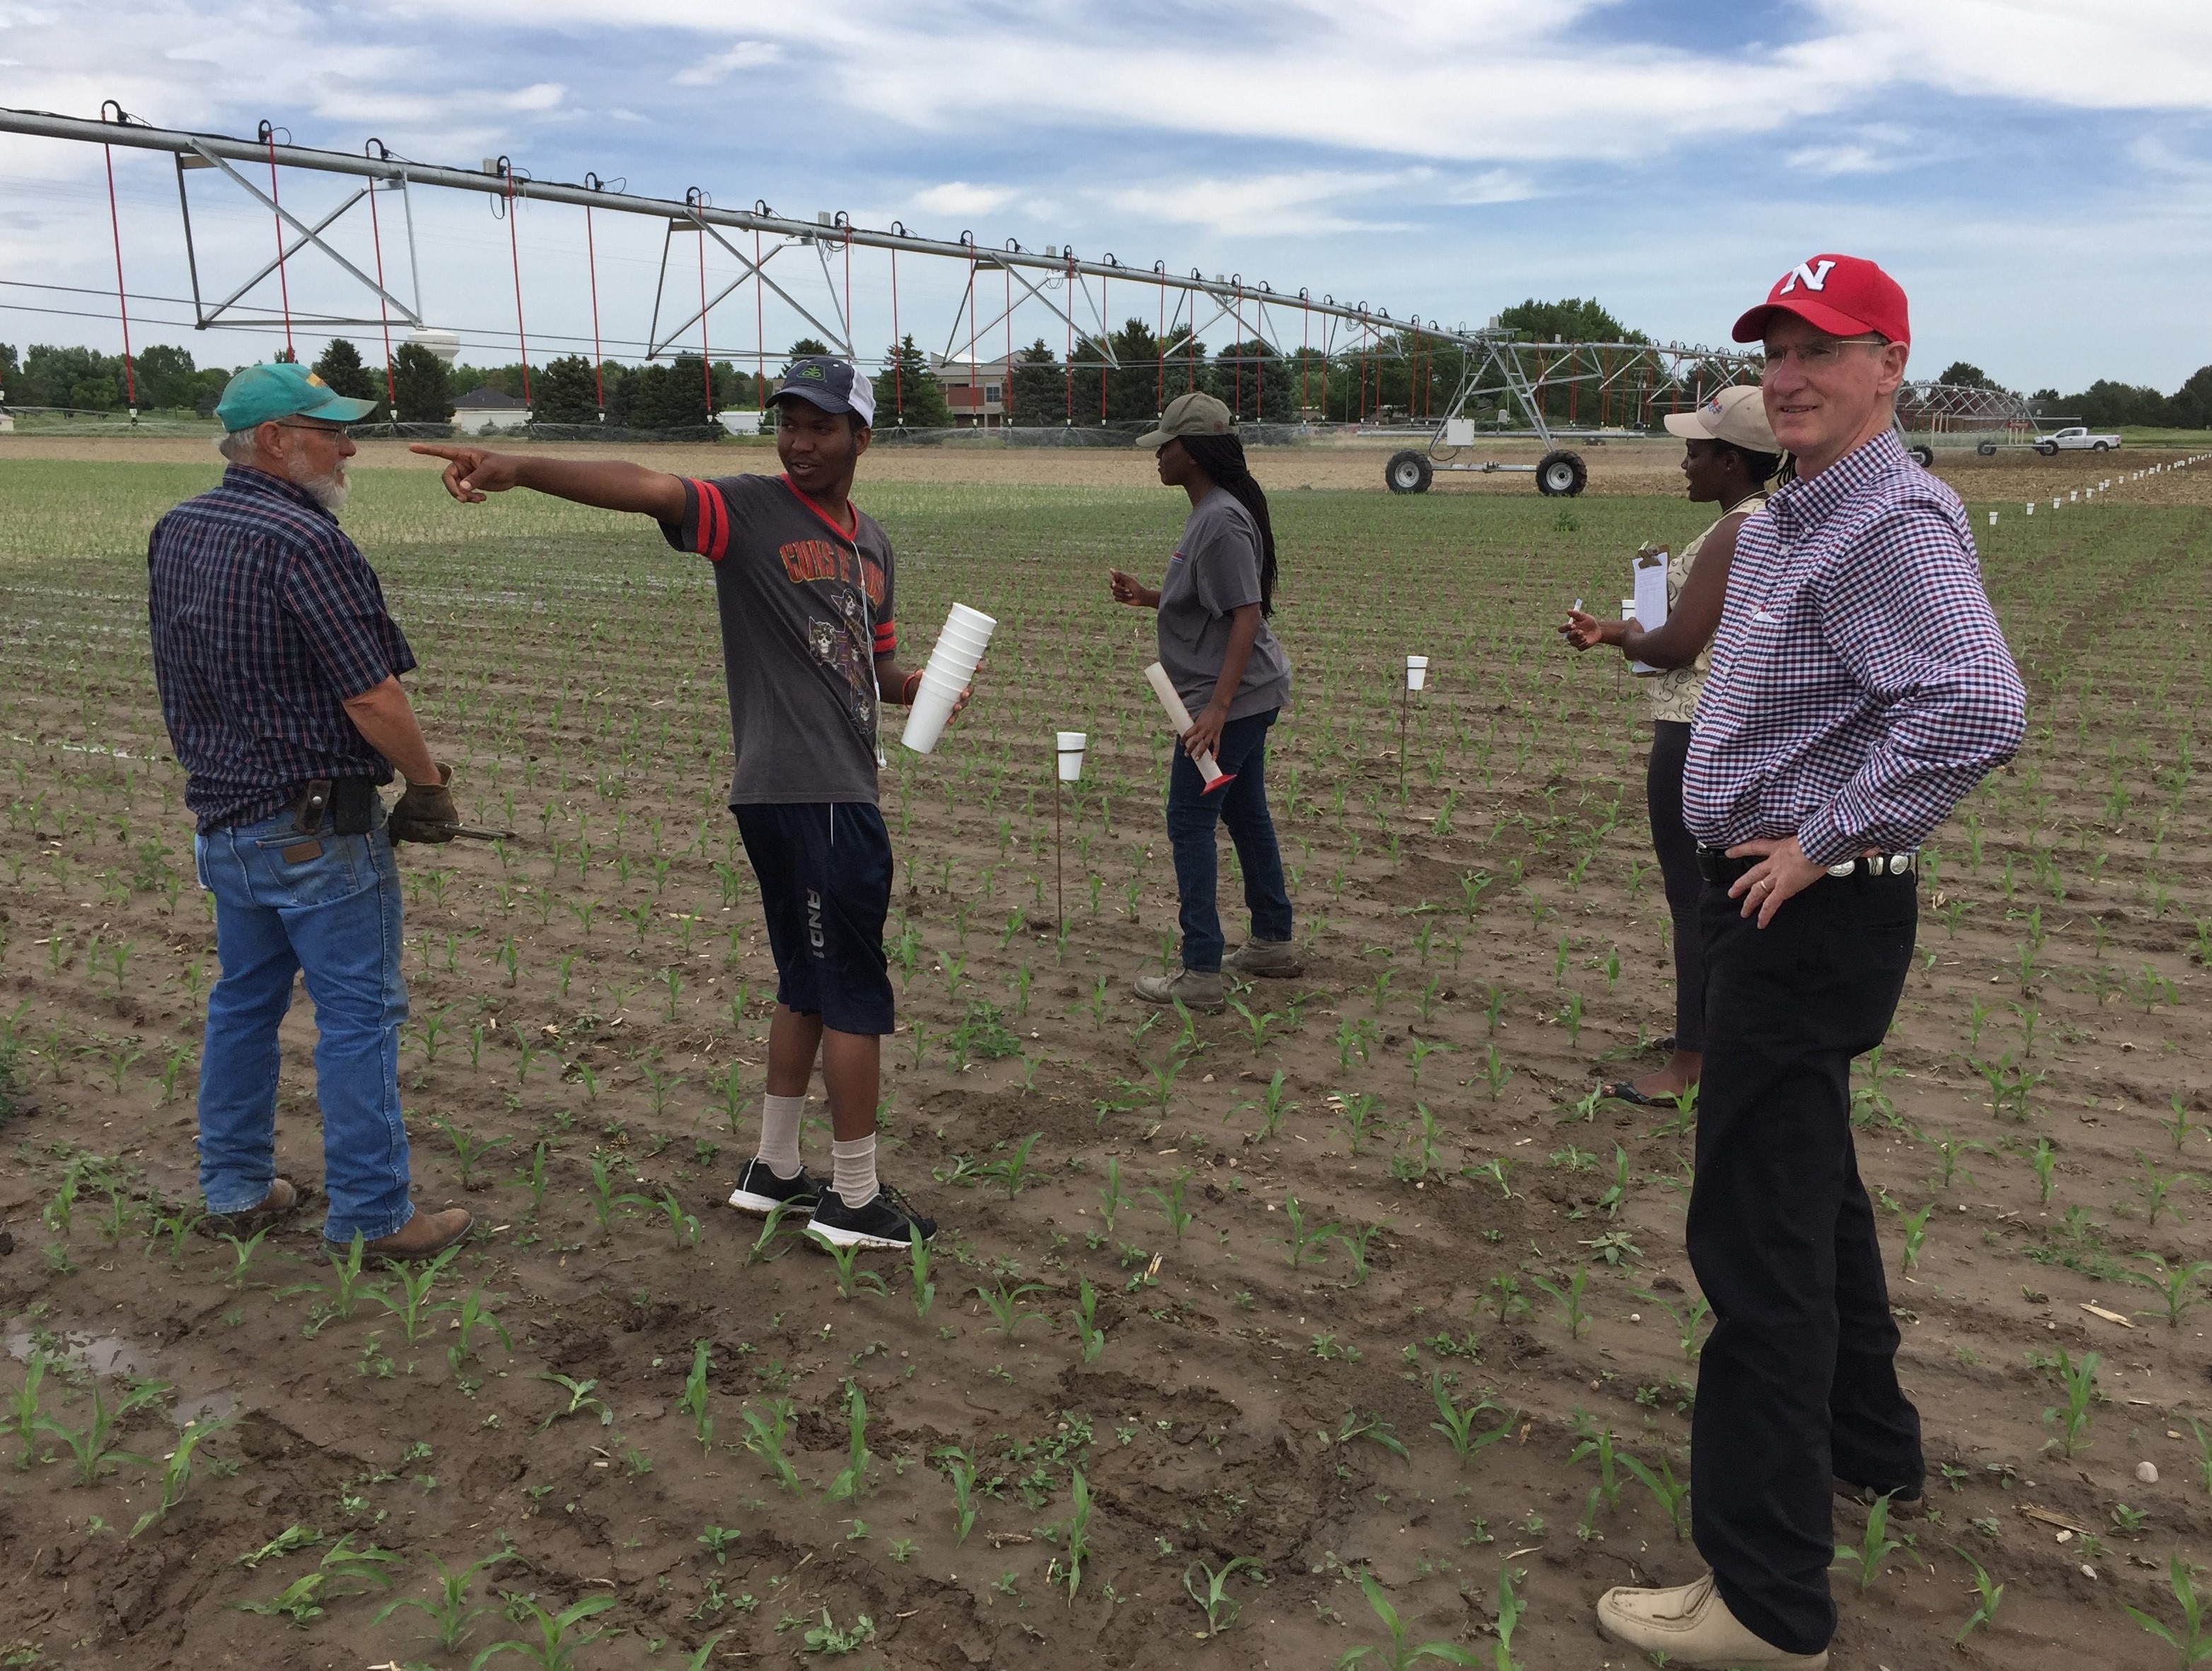 Rwandan scholars work at the University of Nebraska Panhandle Research and Extension Center in Scottsbluff in 2017. PREC Director Jack Whittier is at right. (Courtesy photo)